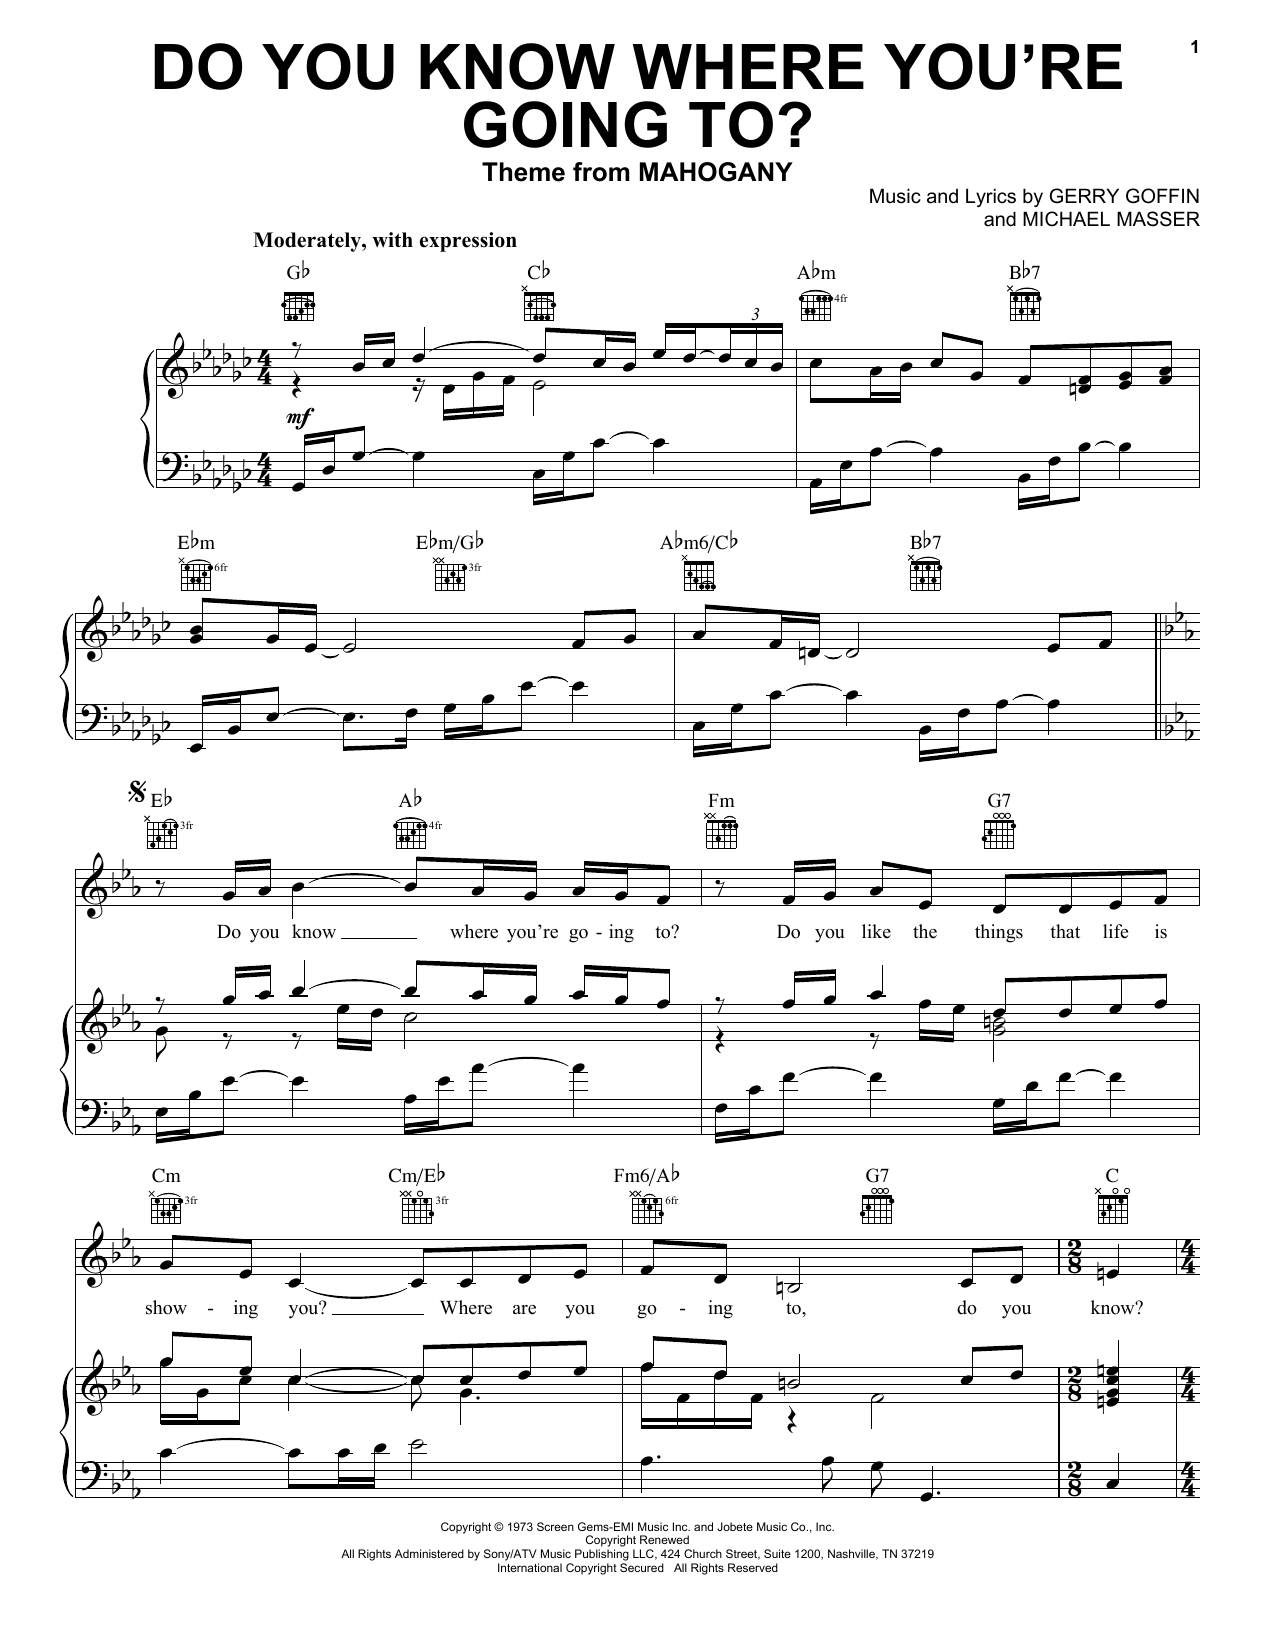 Diana Ross Do You Know Where You're Going To? sheet music notes and chords. Download Printable PDF.